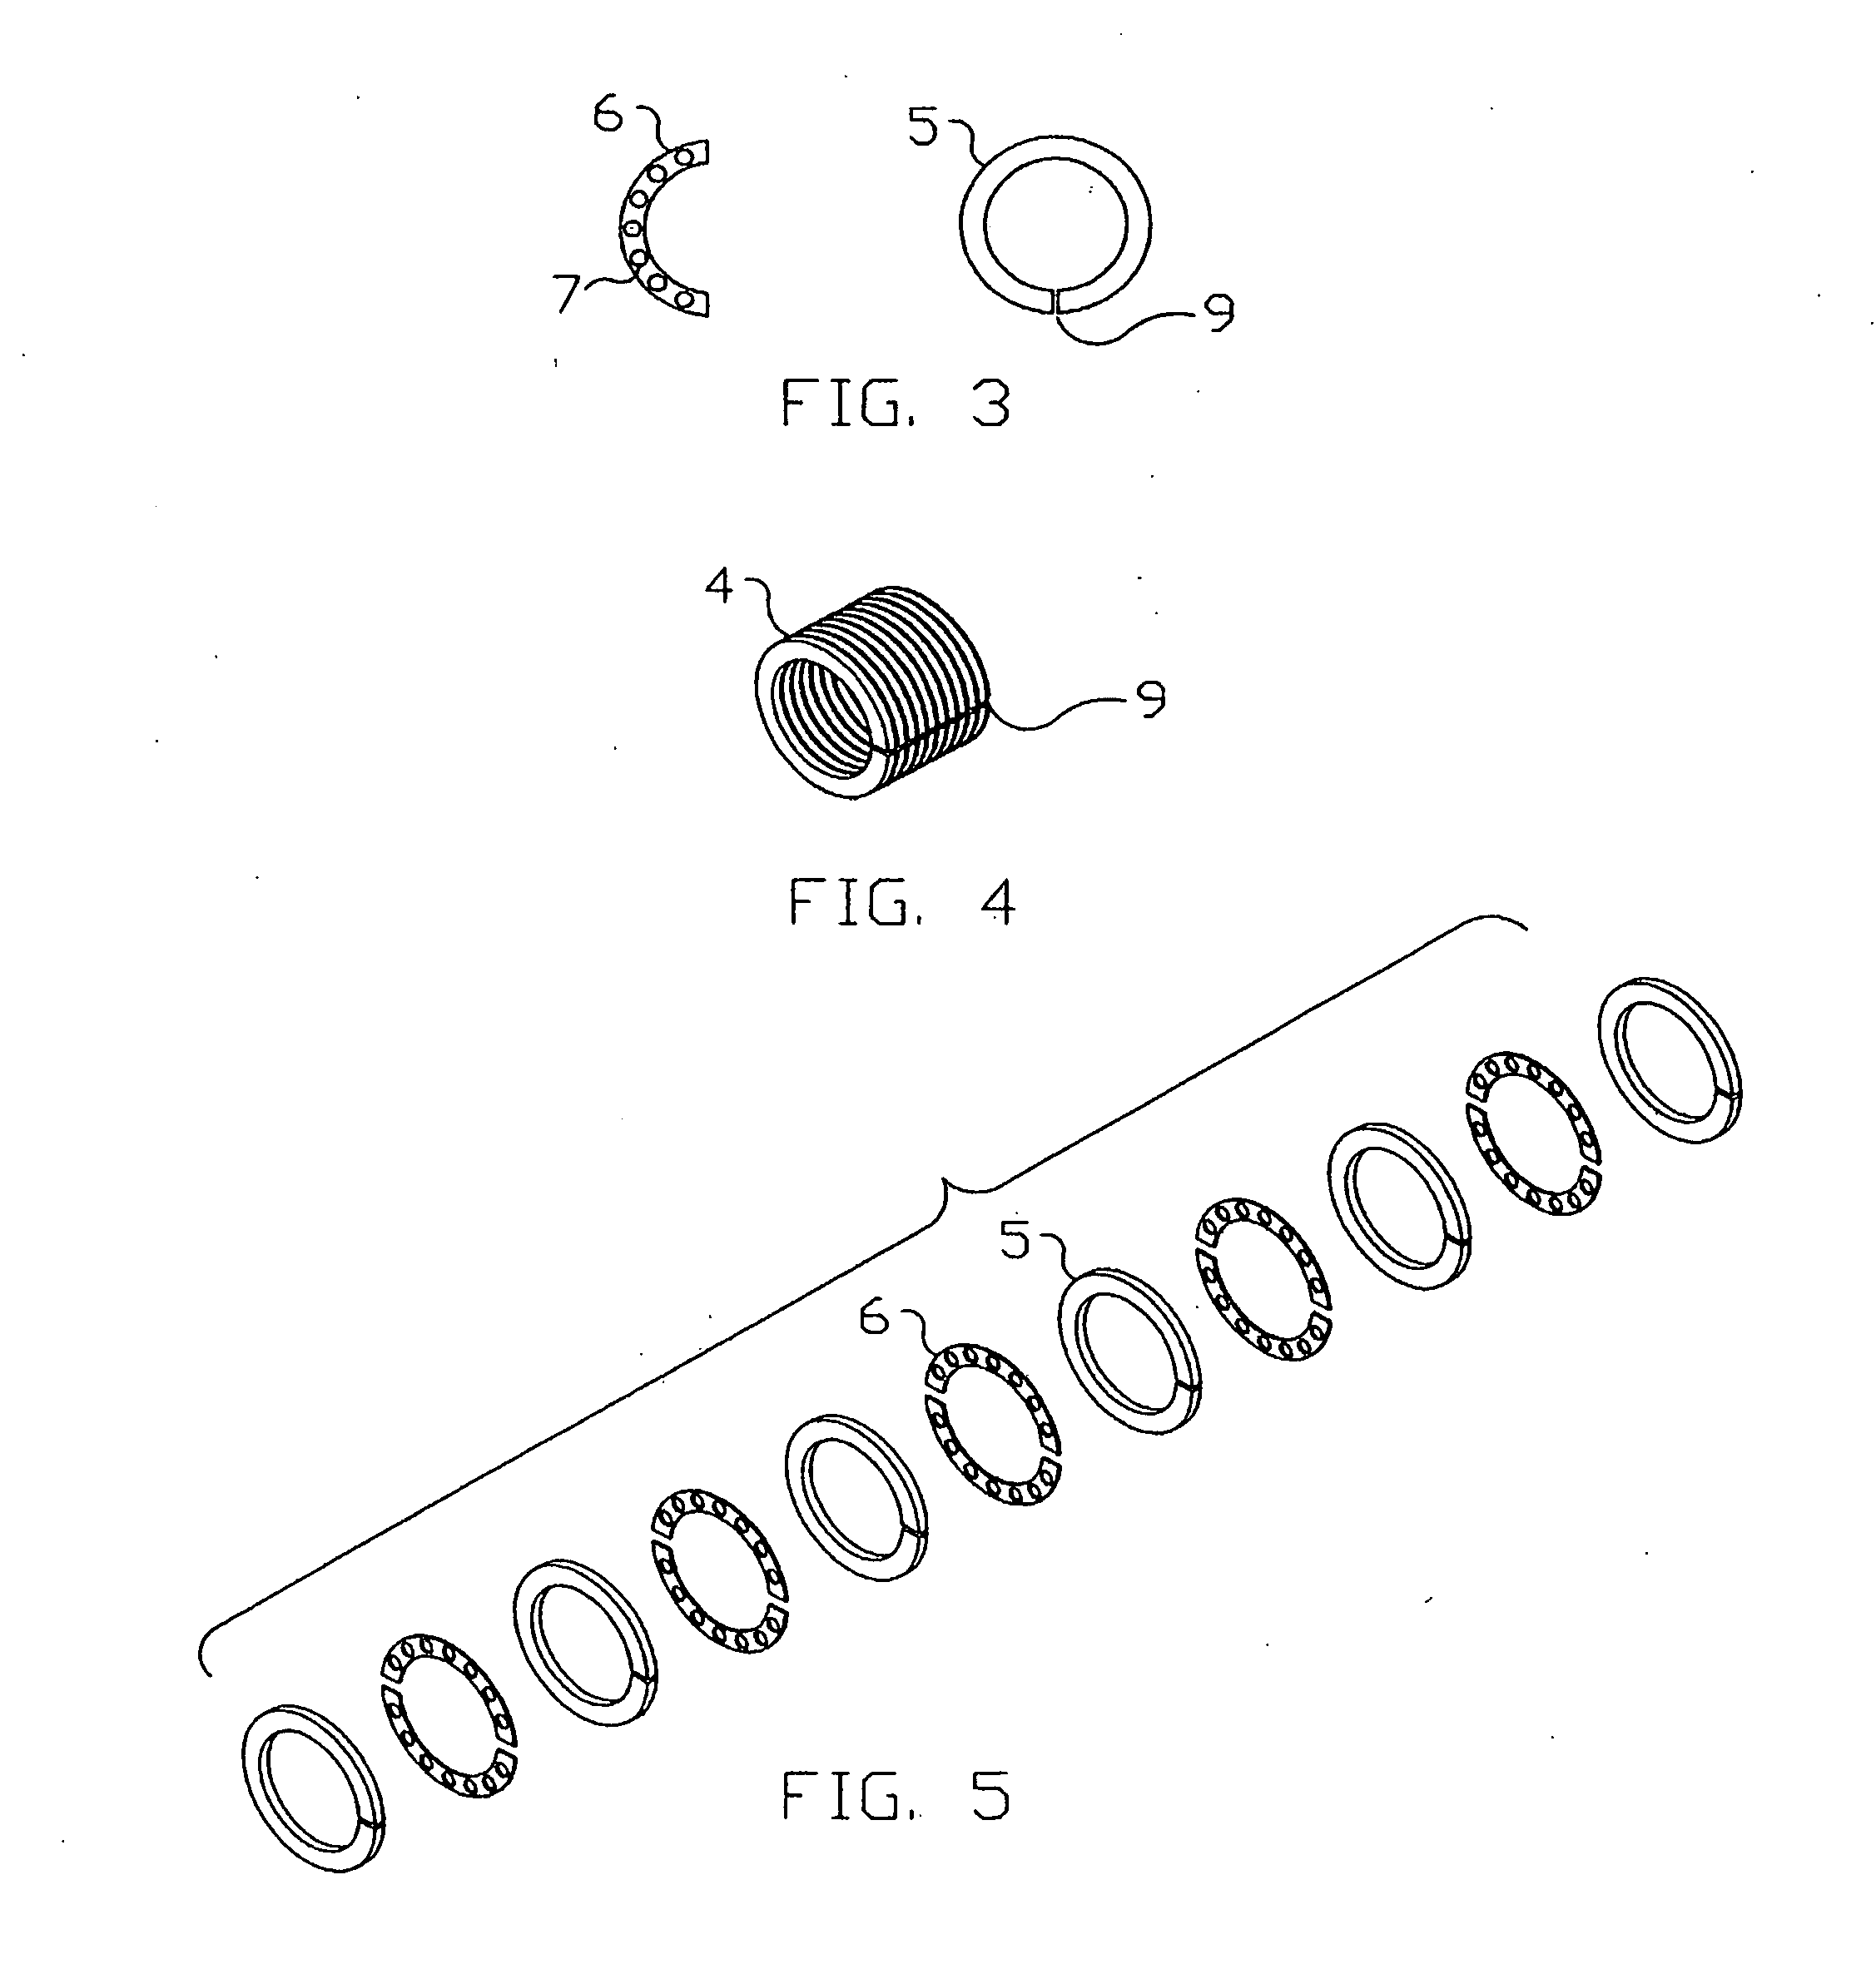 Composite flexible and conductive catheter electrode